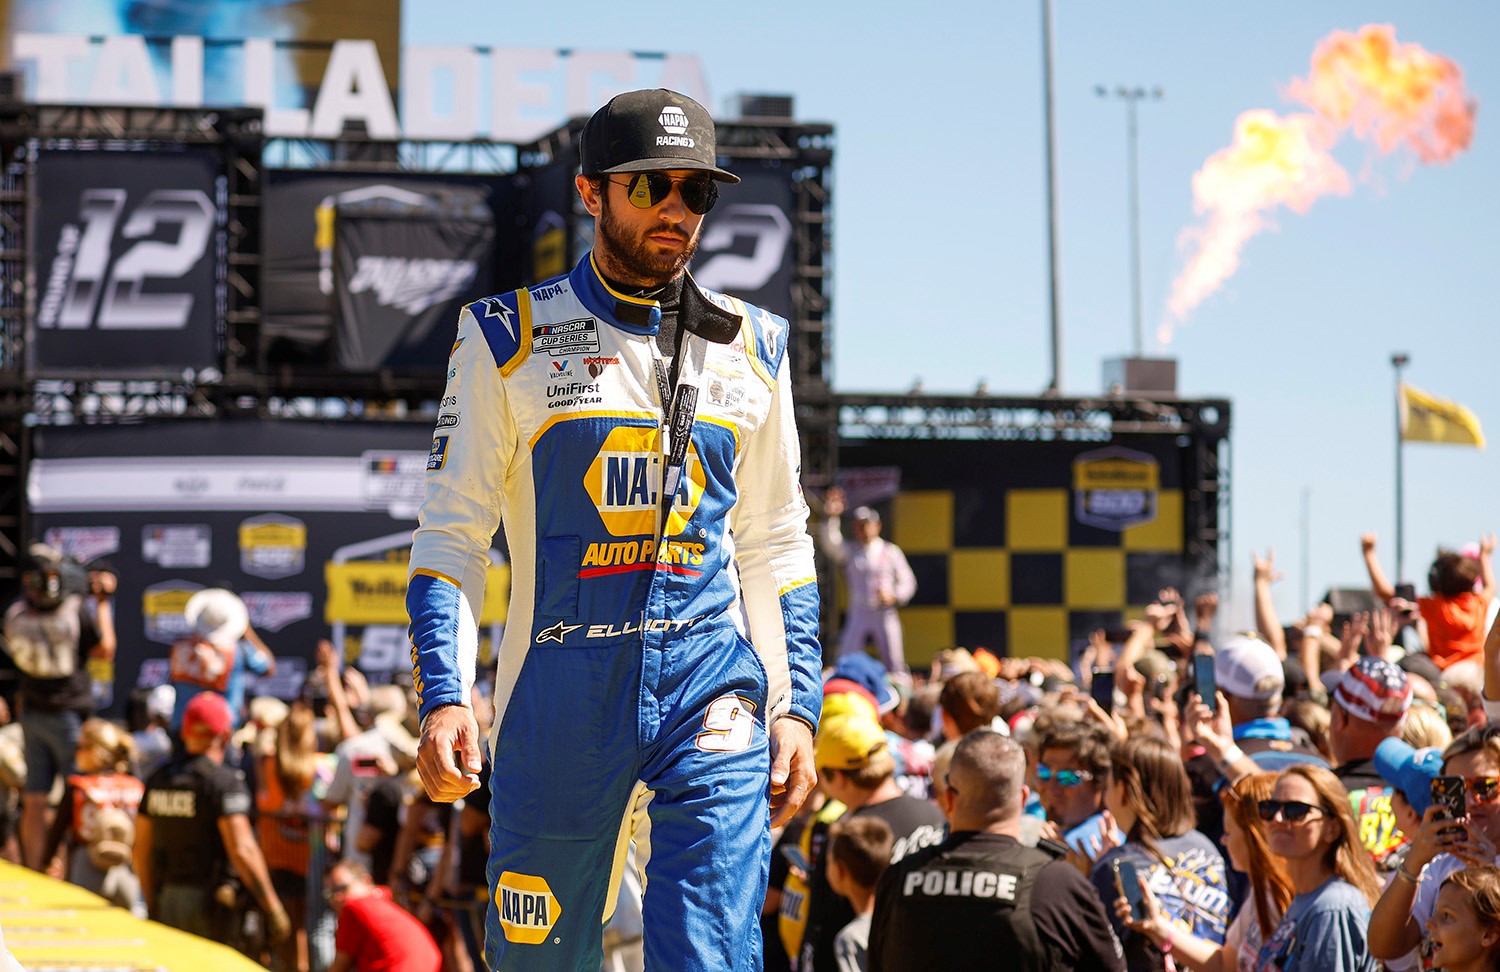 NASCAR Chevy Driver Chase Elliott Most Popular In Cup Series